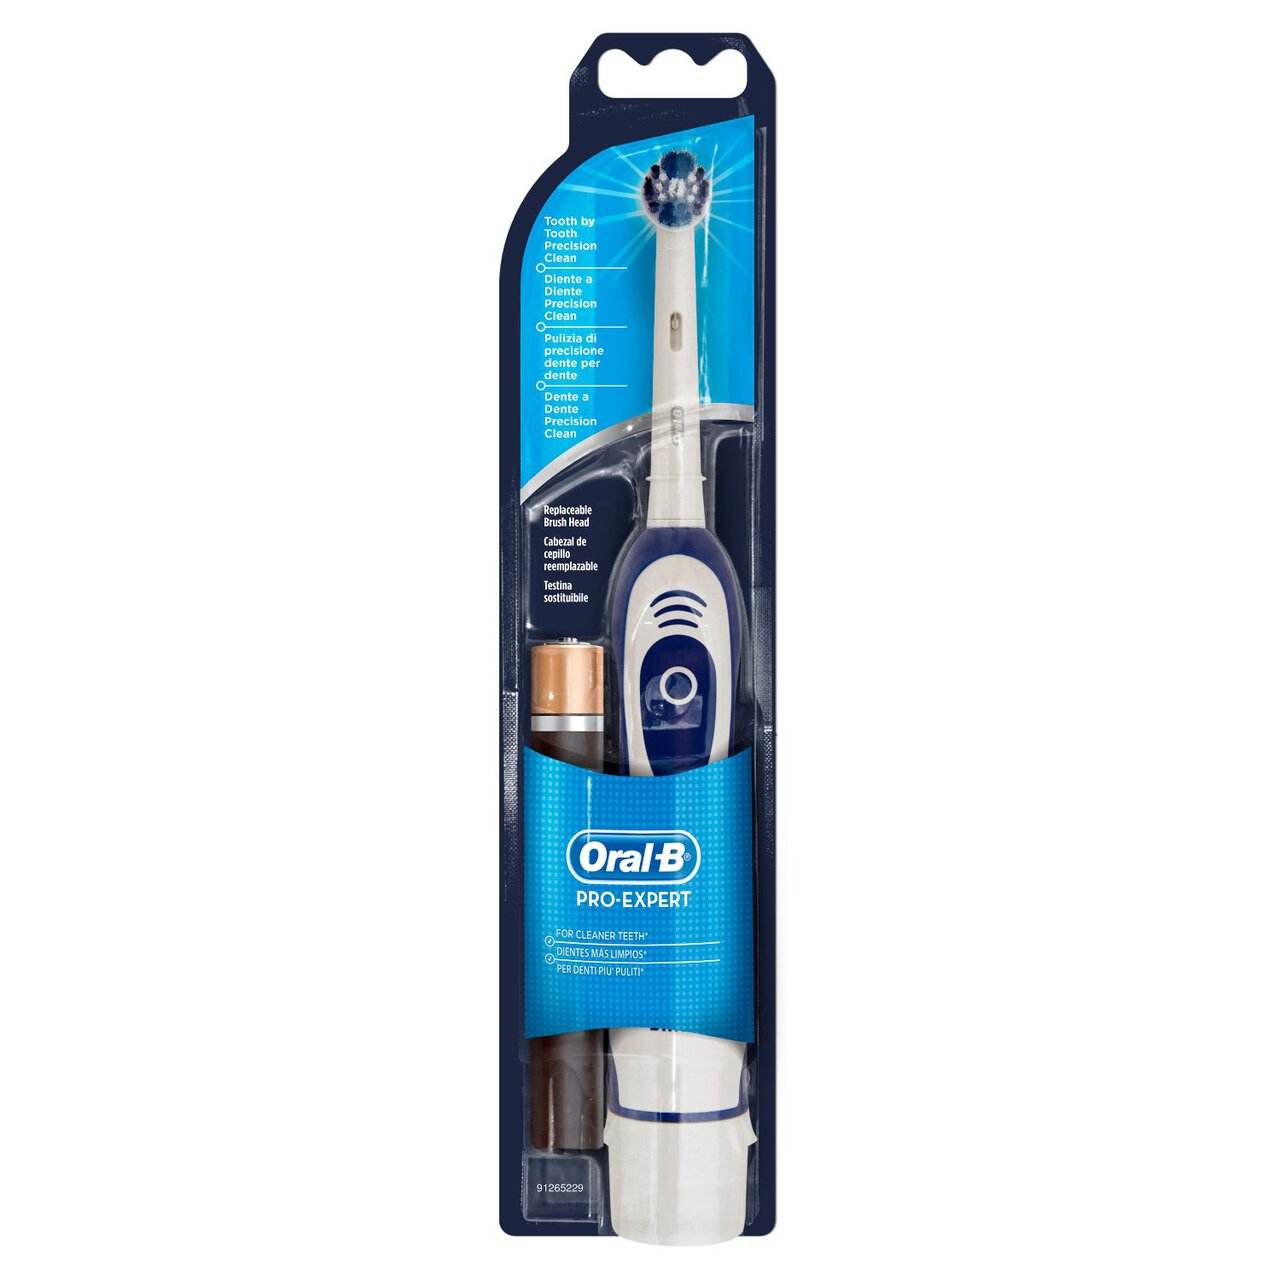 Oral-B Advance Power 400 Battery Toothbrush